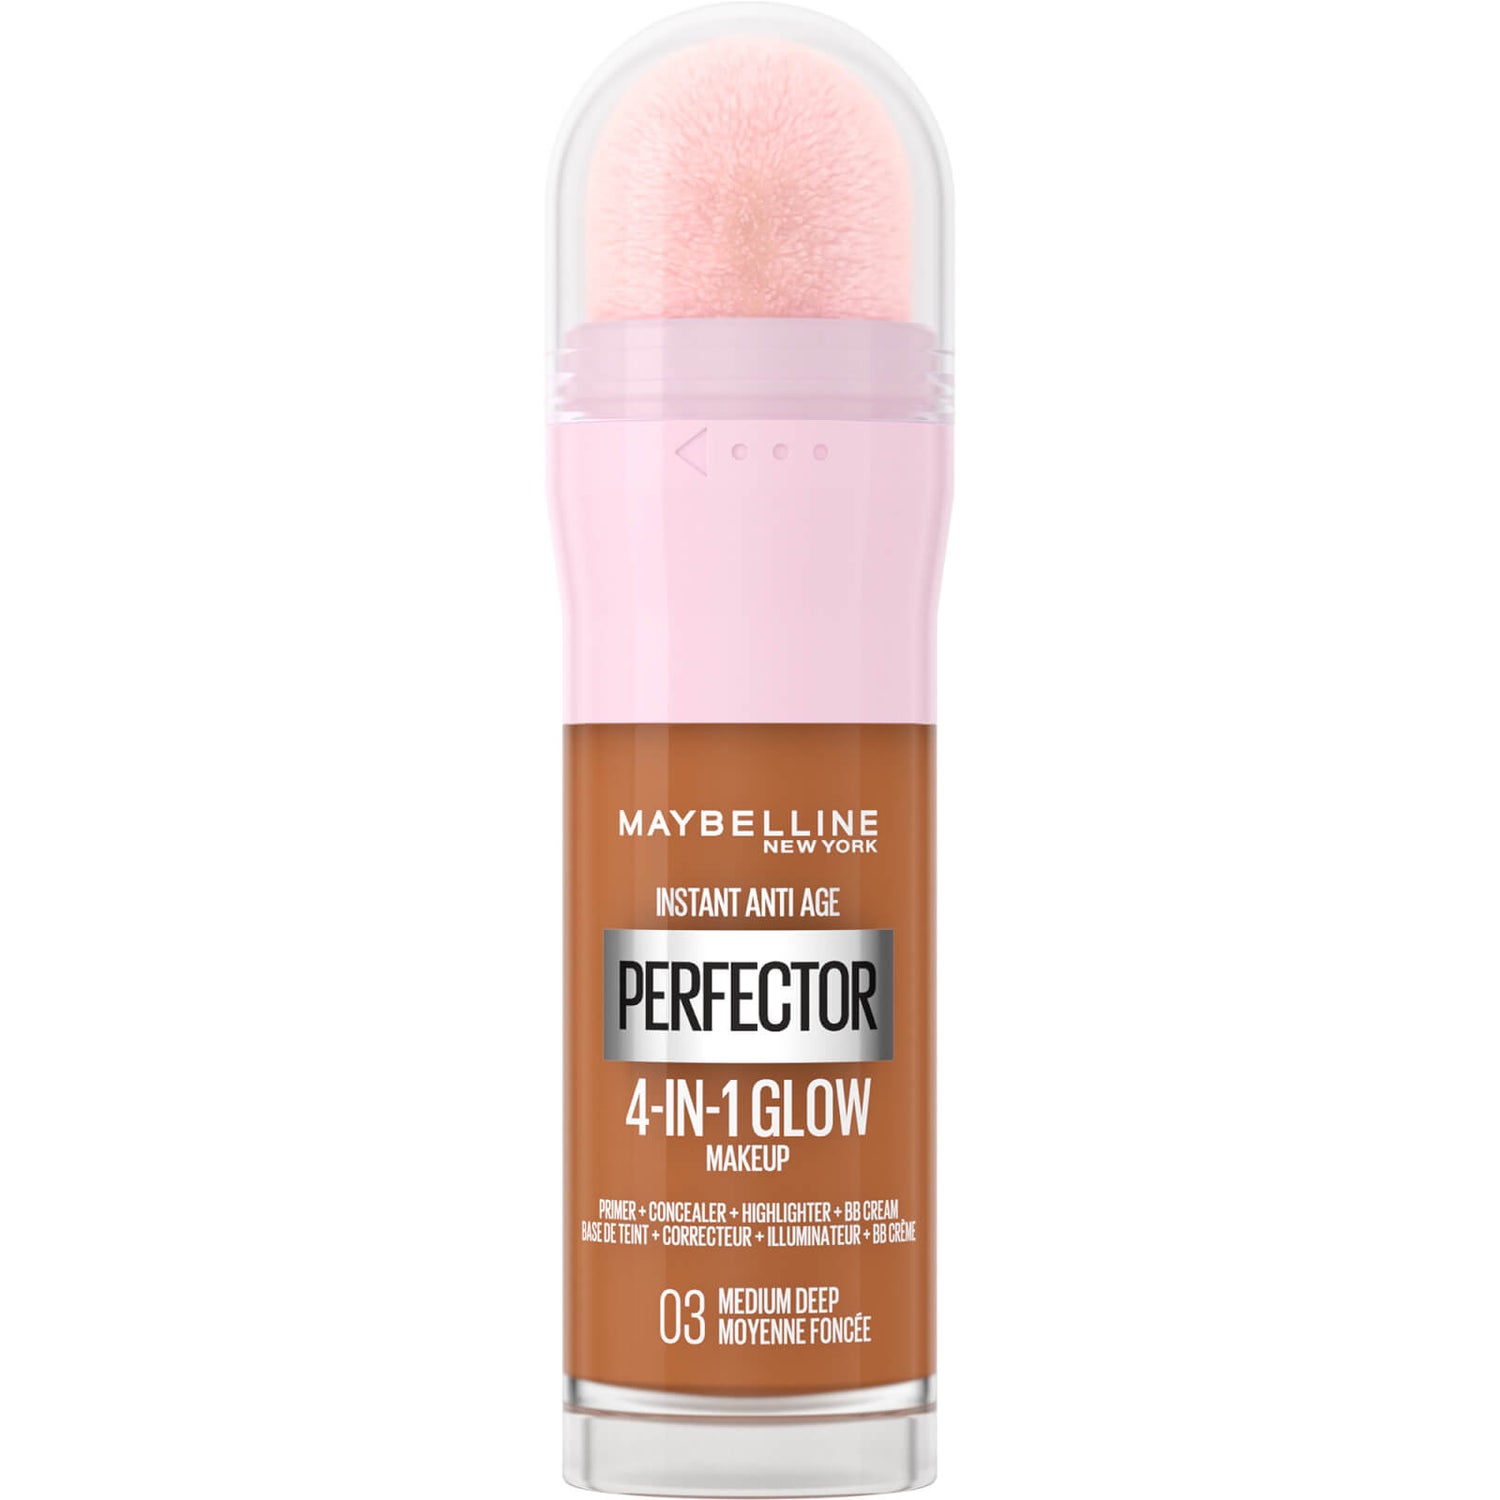 Maybelline Instant Anti Age Perfector 4-in-1 Glow Primer, Concealer, Highlighter, BB Cream 20ml (Various Shades)